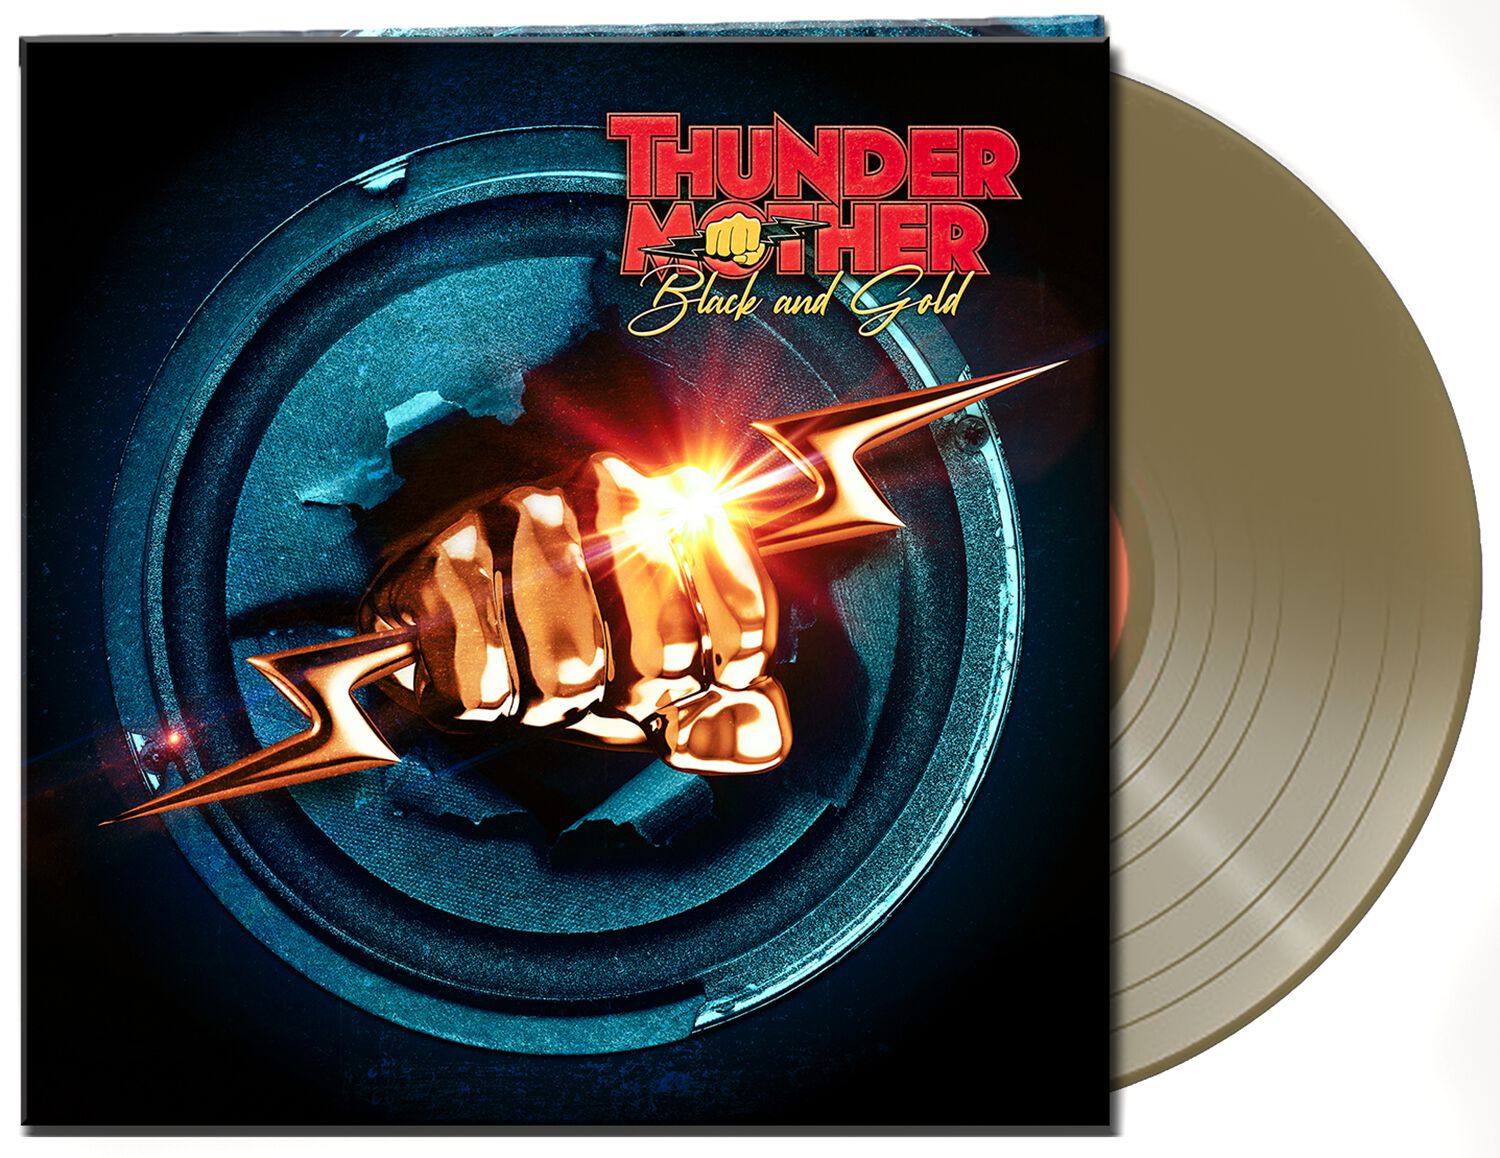 Thundermother Black and gold LP goldfarben